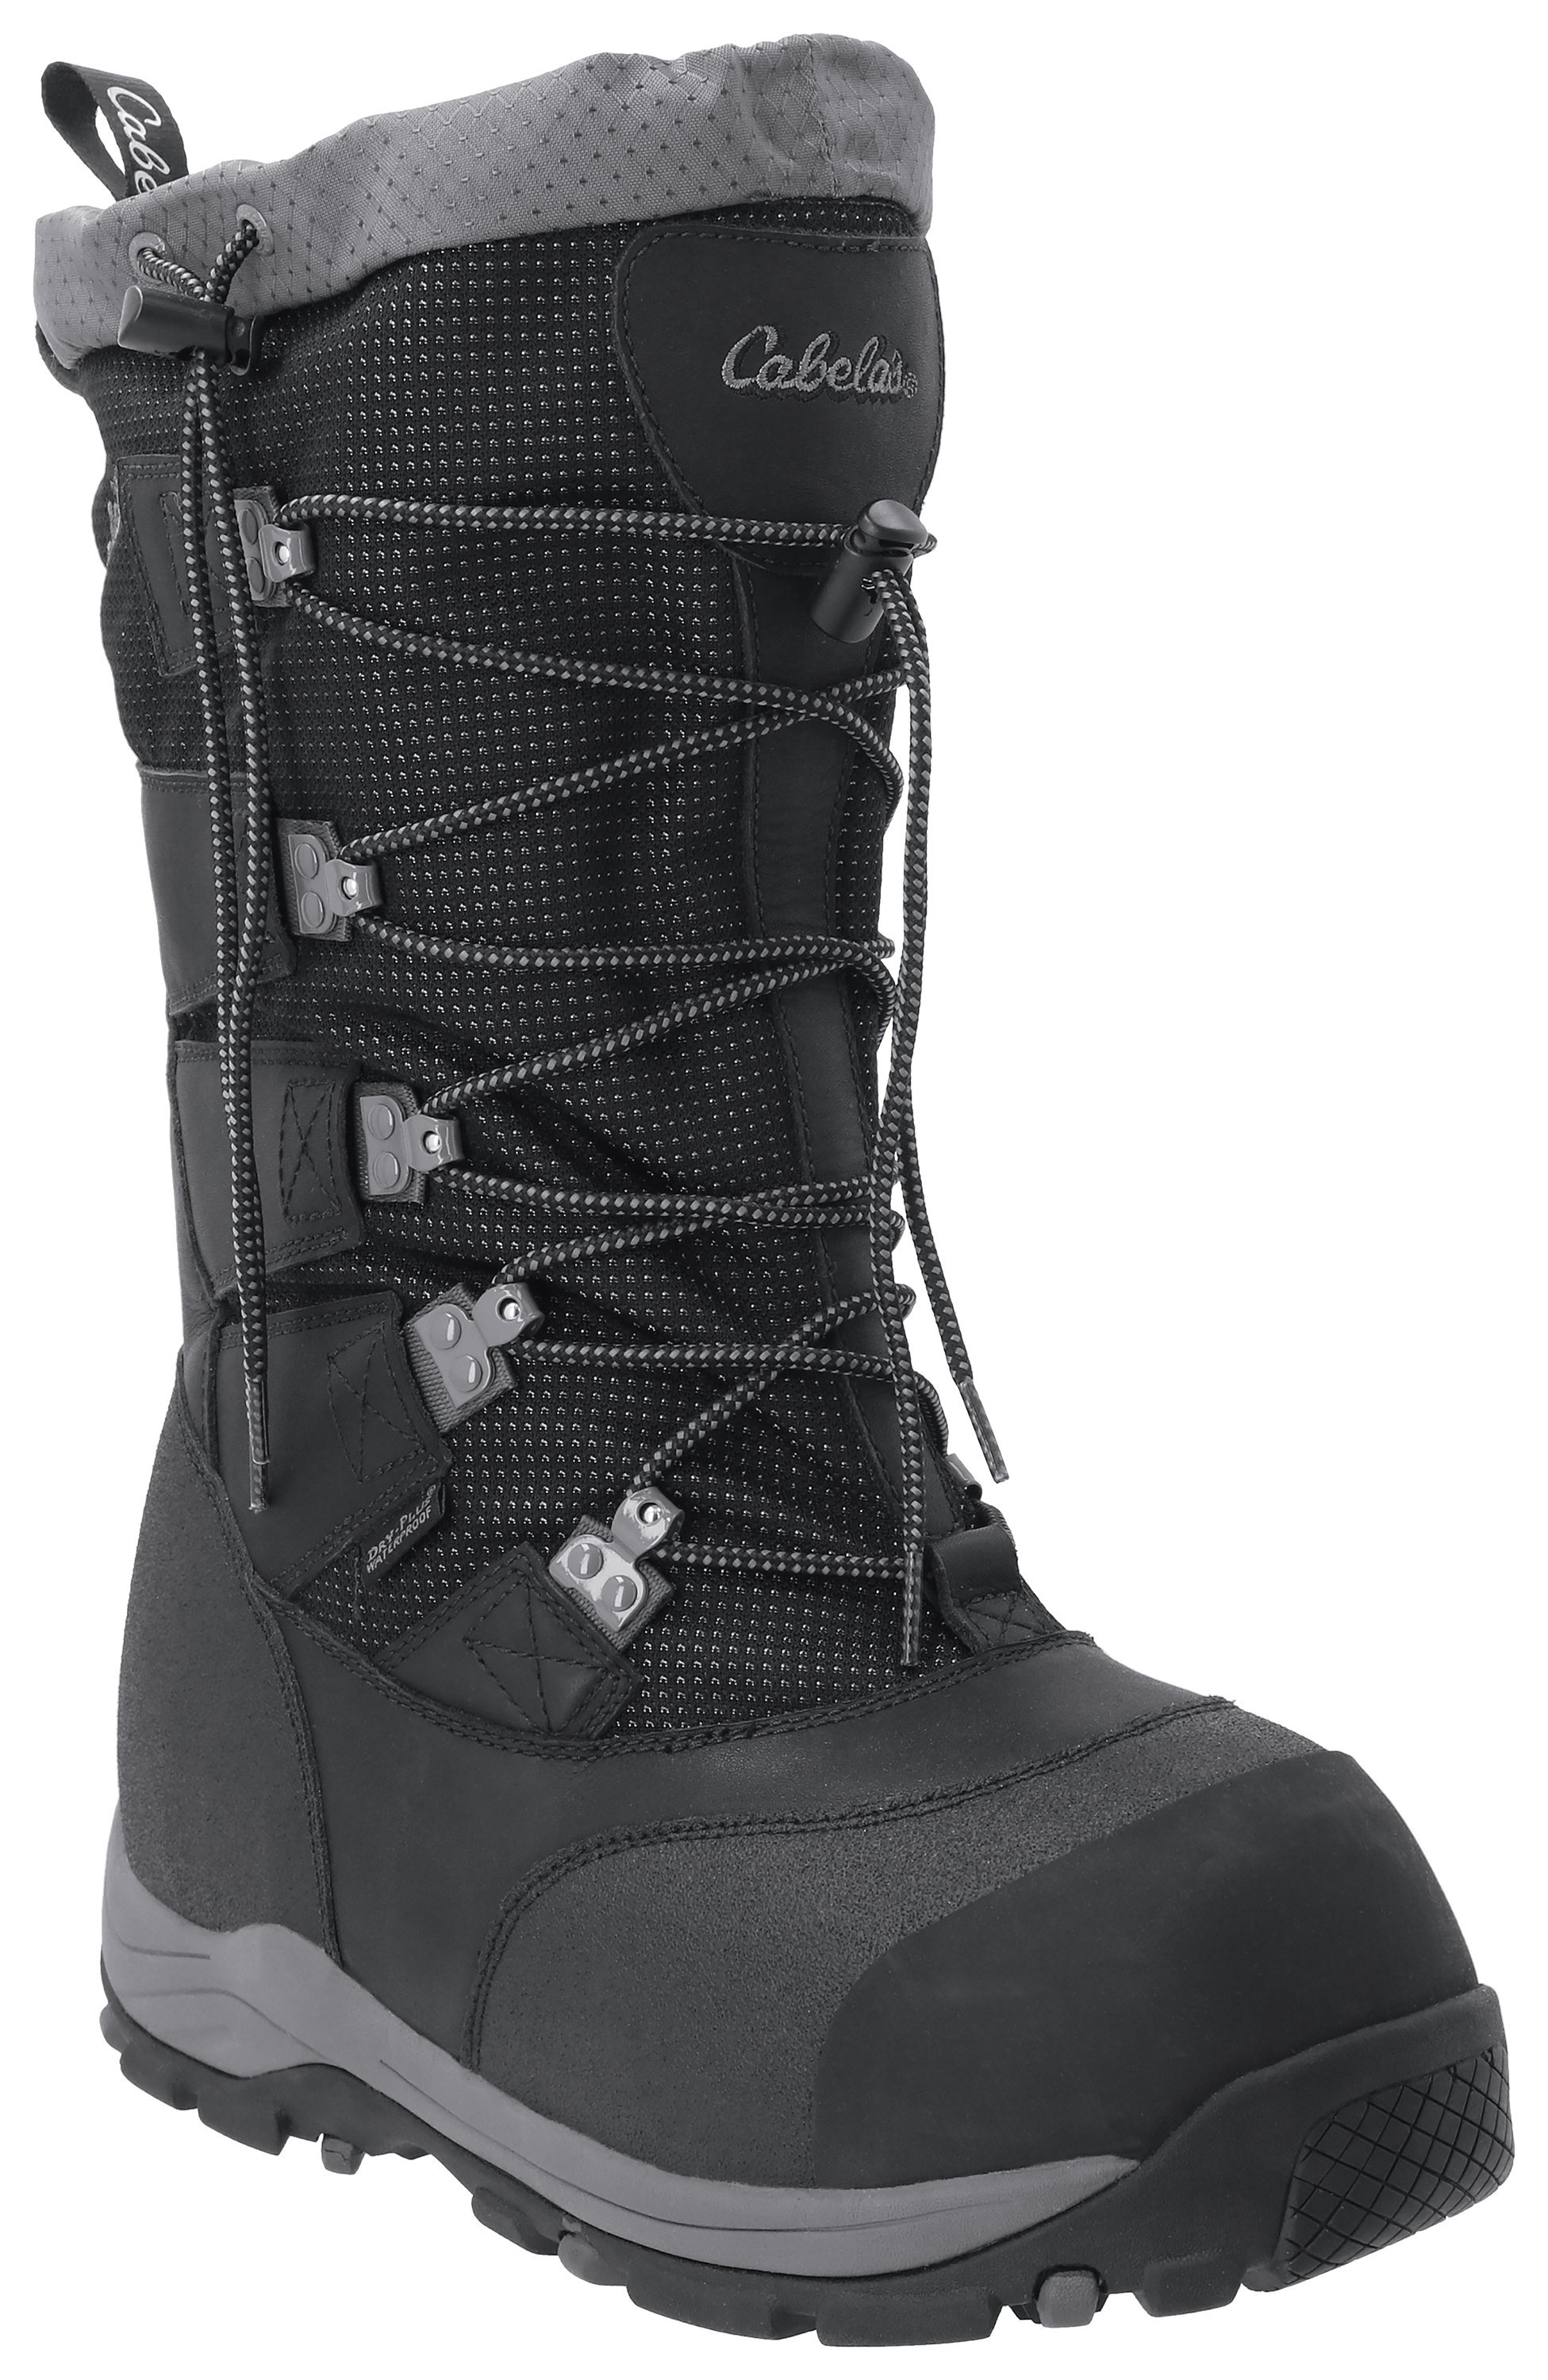 Cabela's Trans-Alaska Insulated Waterproof Pac Boots for Men - Black/Brown - 7M